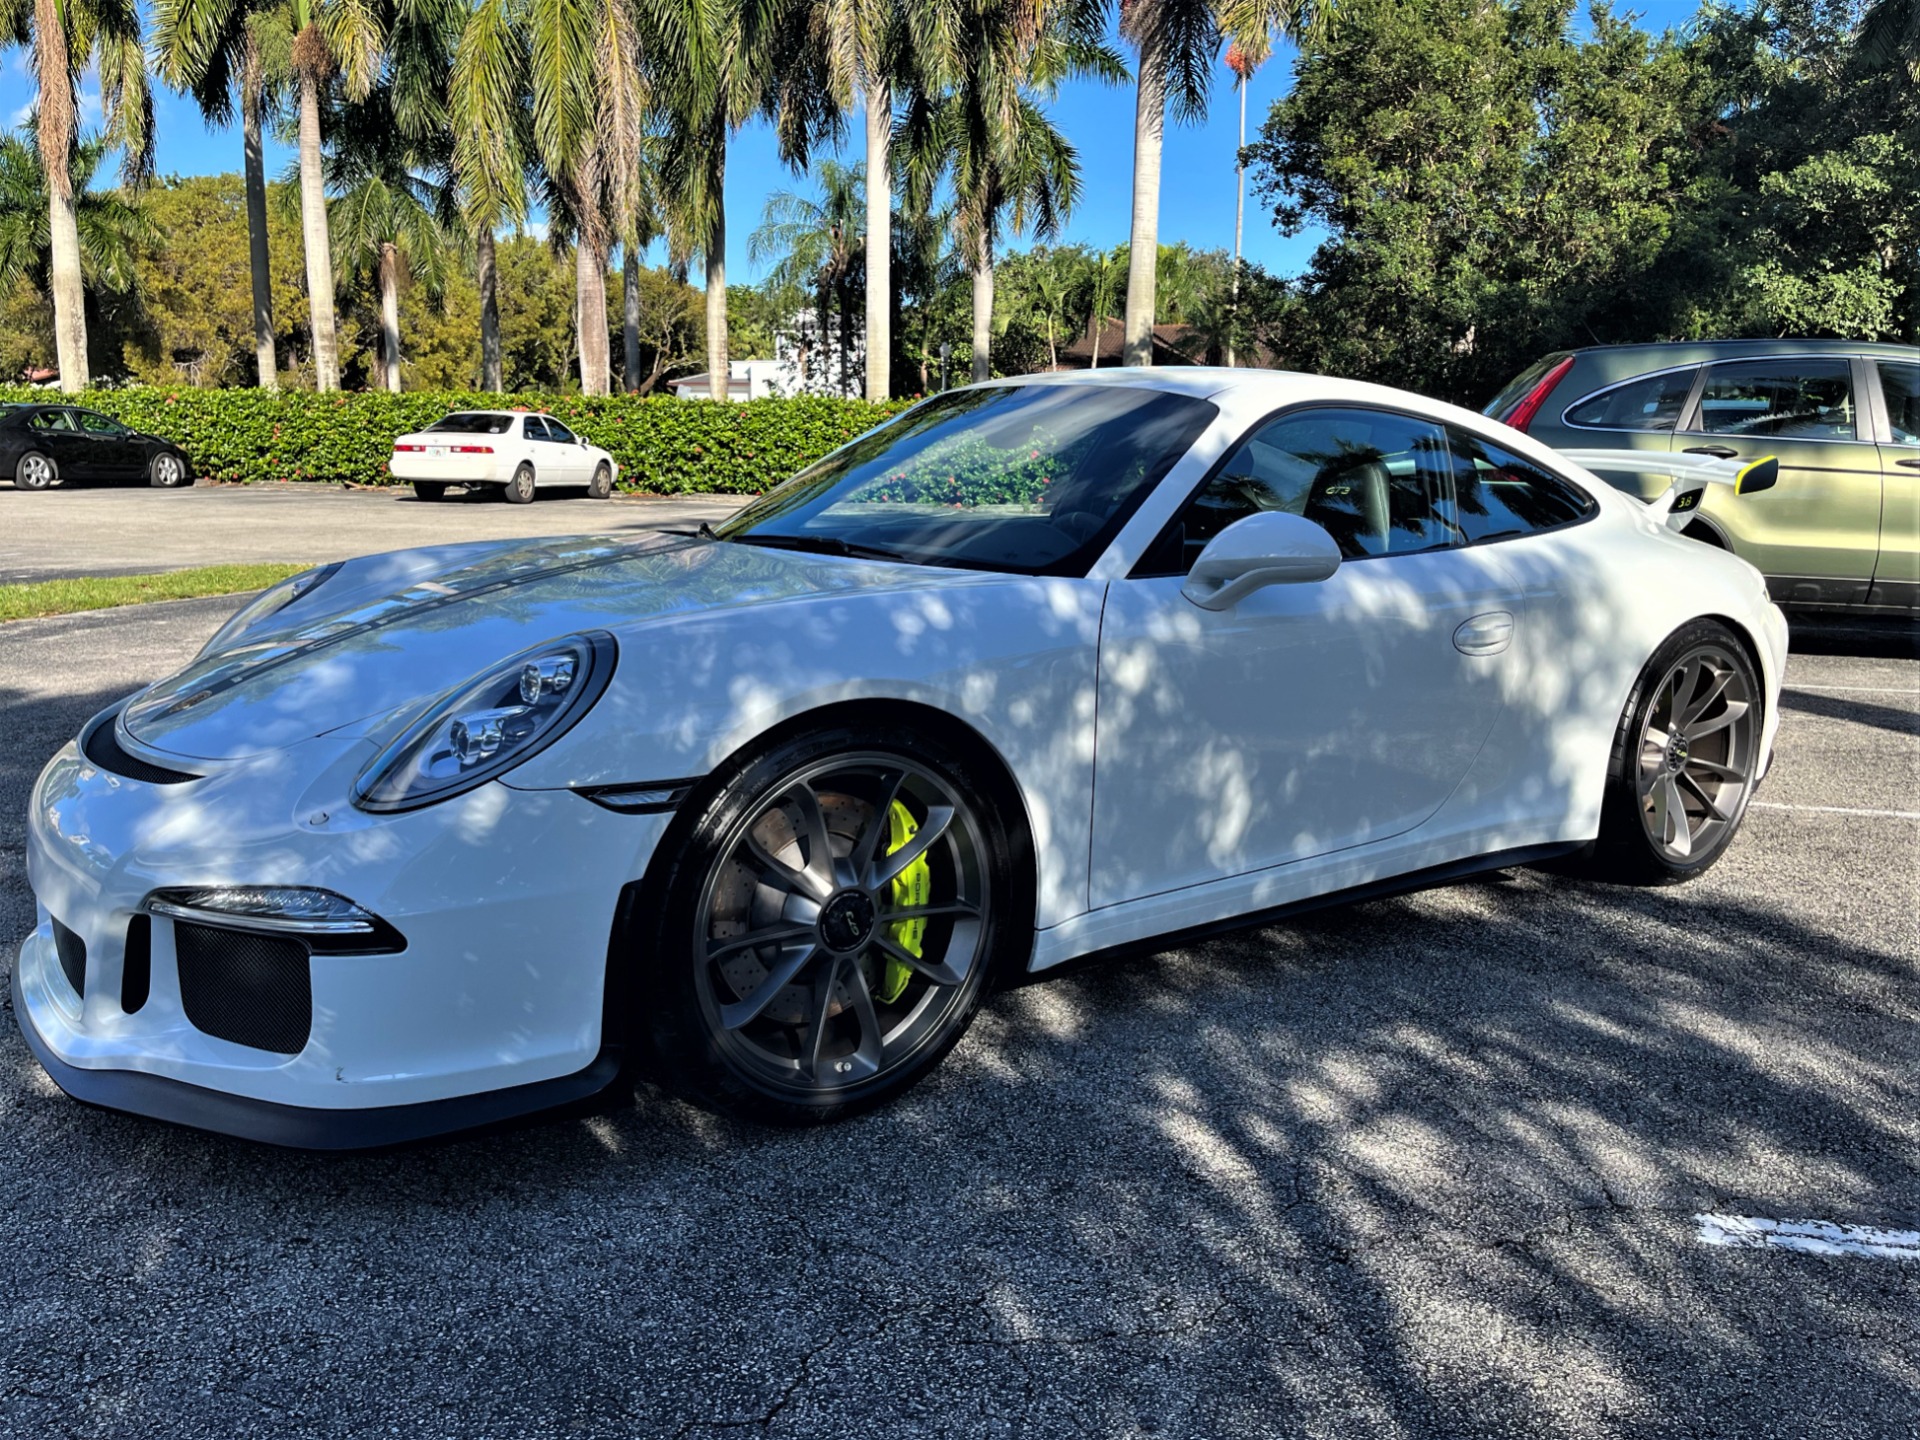 Used 2015 Porsche 911 GT3 for sale $142,850 at The Gables Sports Cars in Miami FL 33146 3